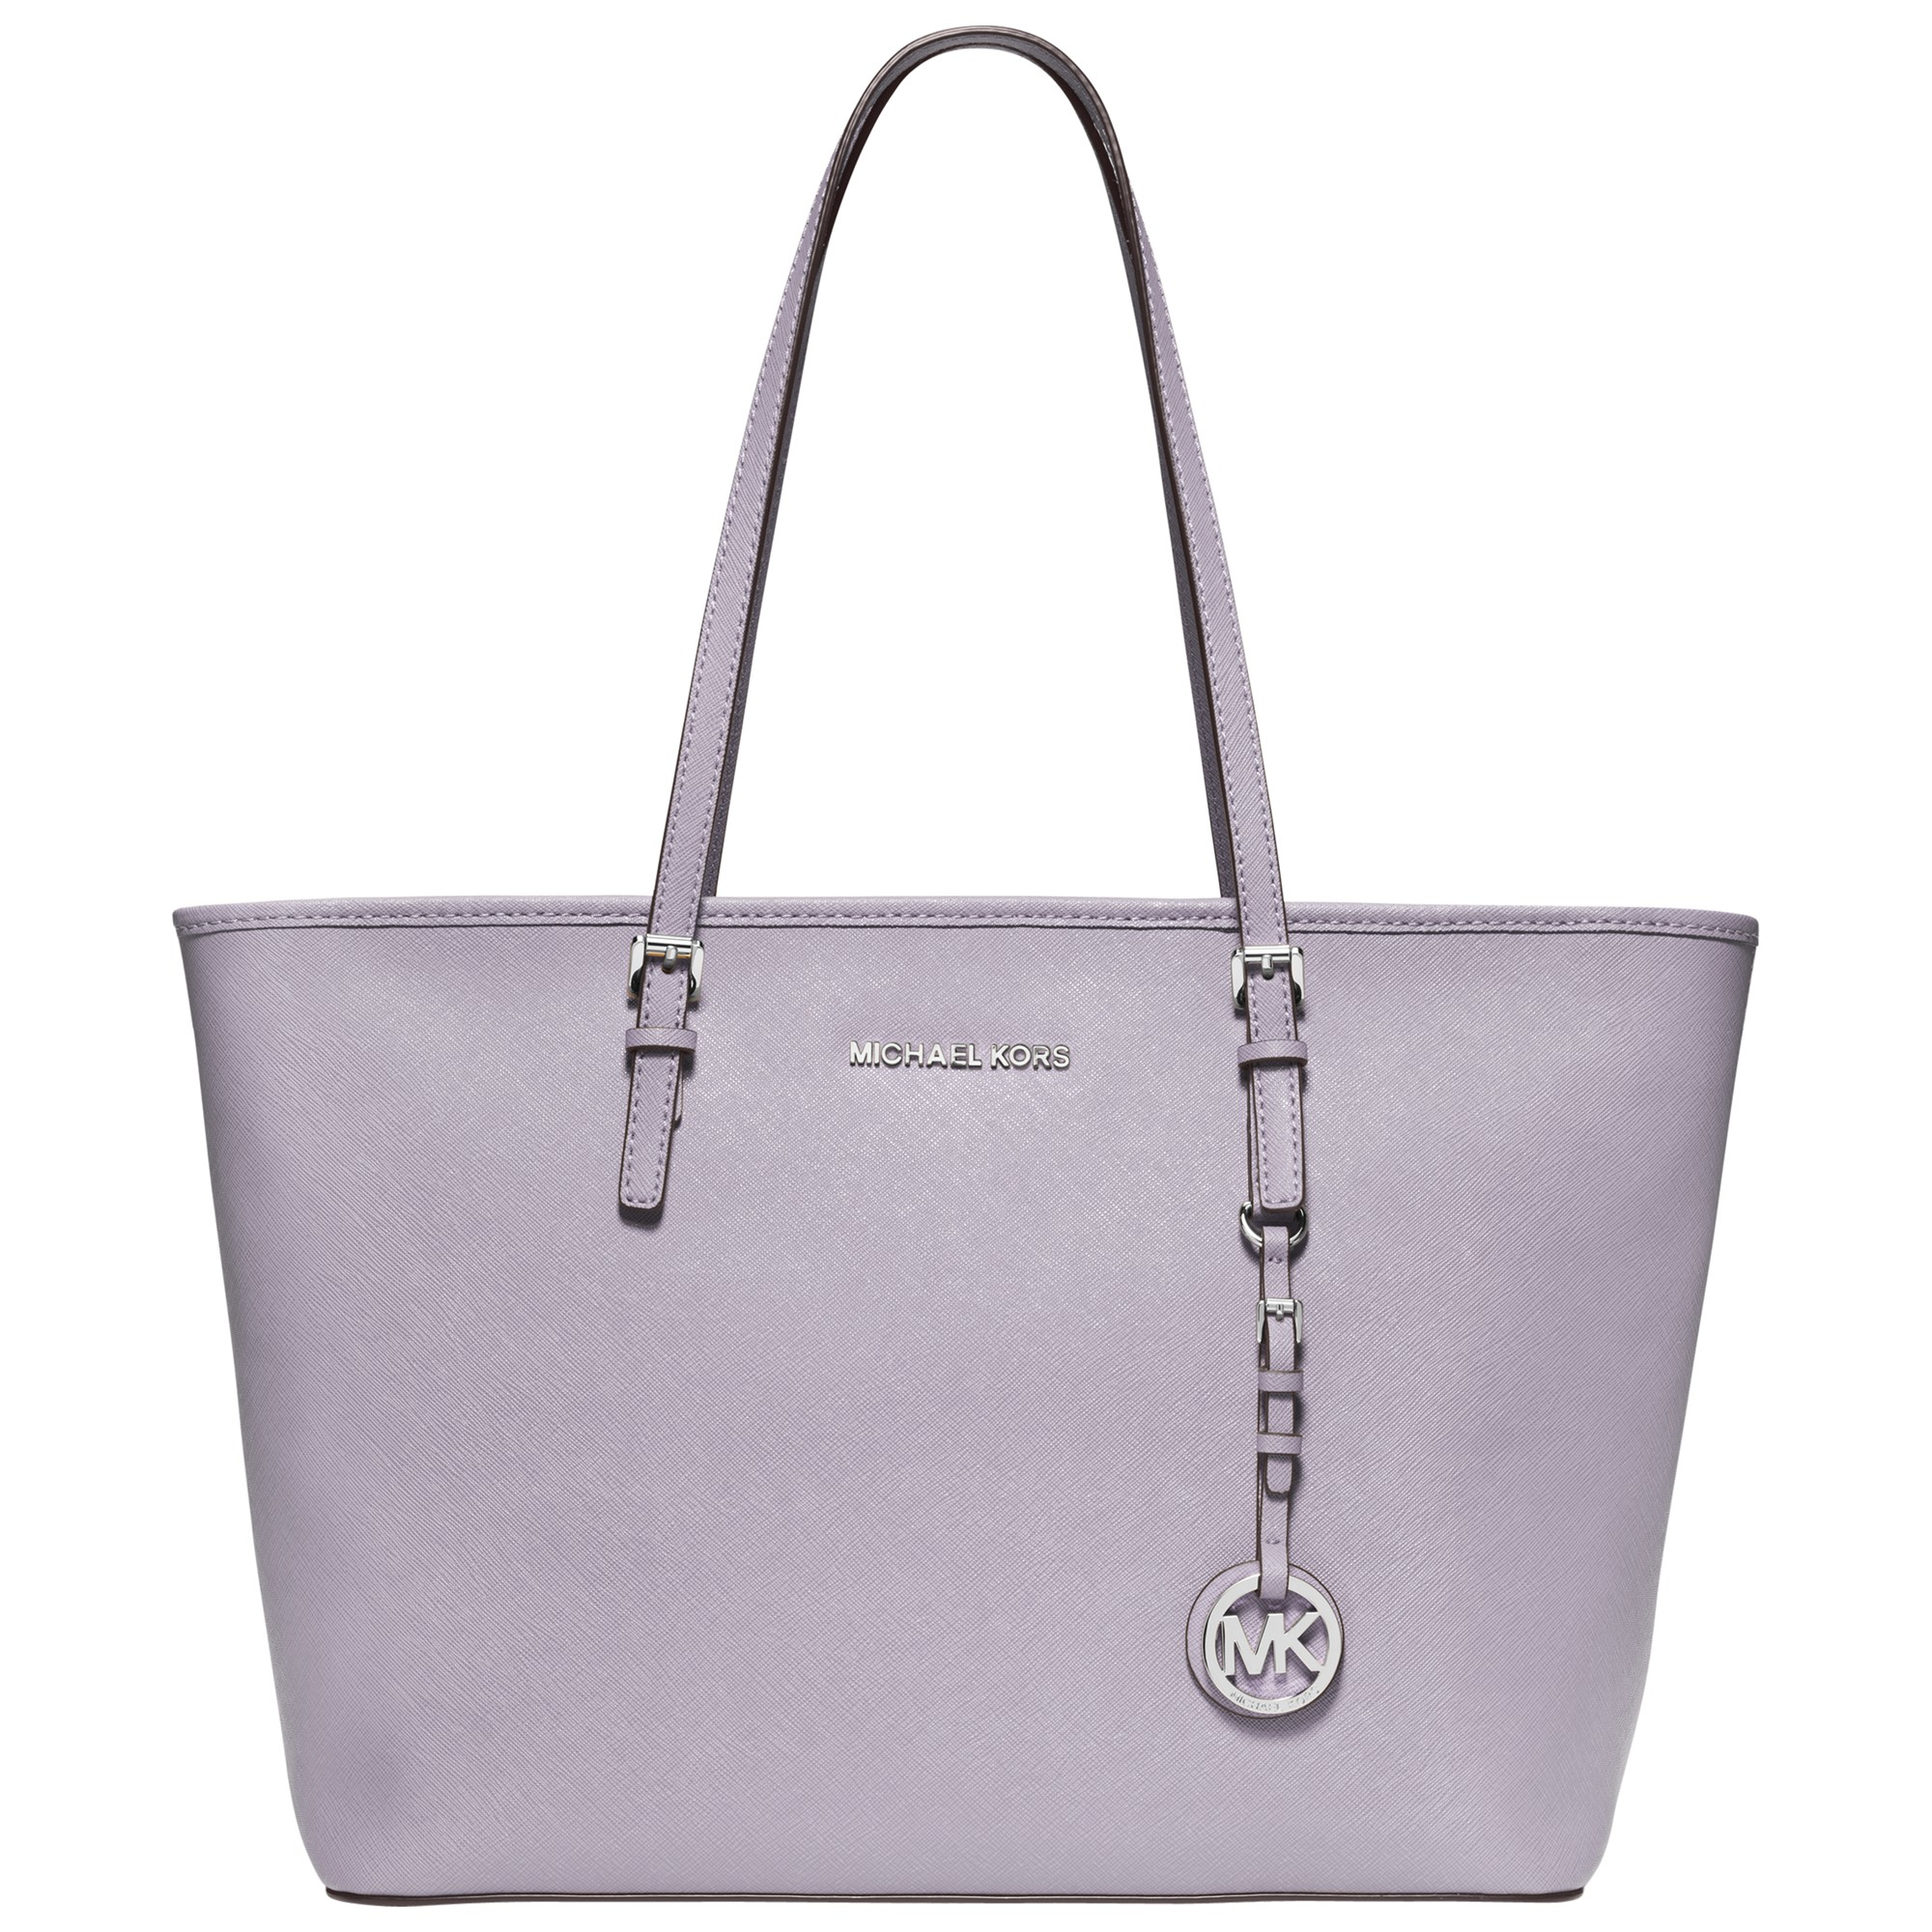 Rent Michael Kors small leather purple handbag with soulder strap in London  rent for 1300  day 643  week